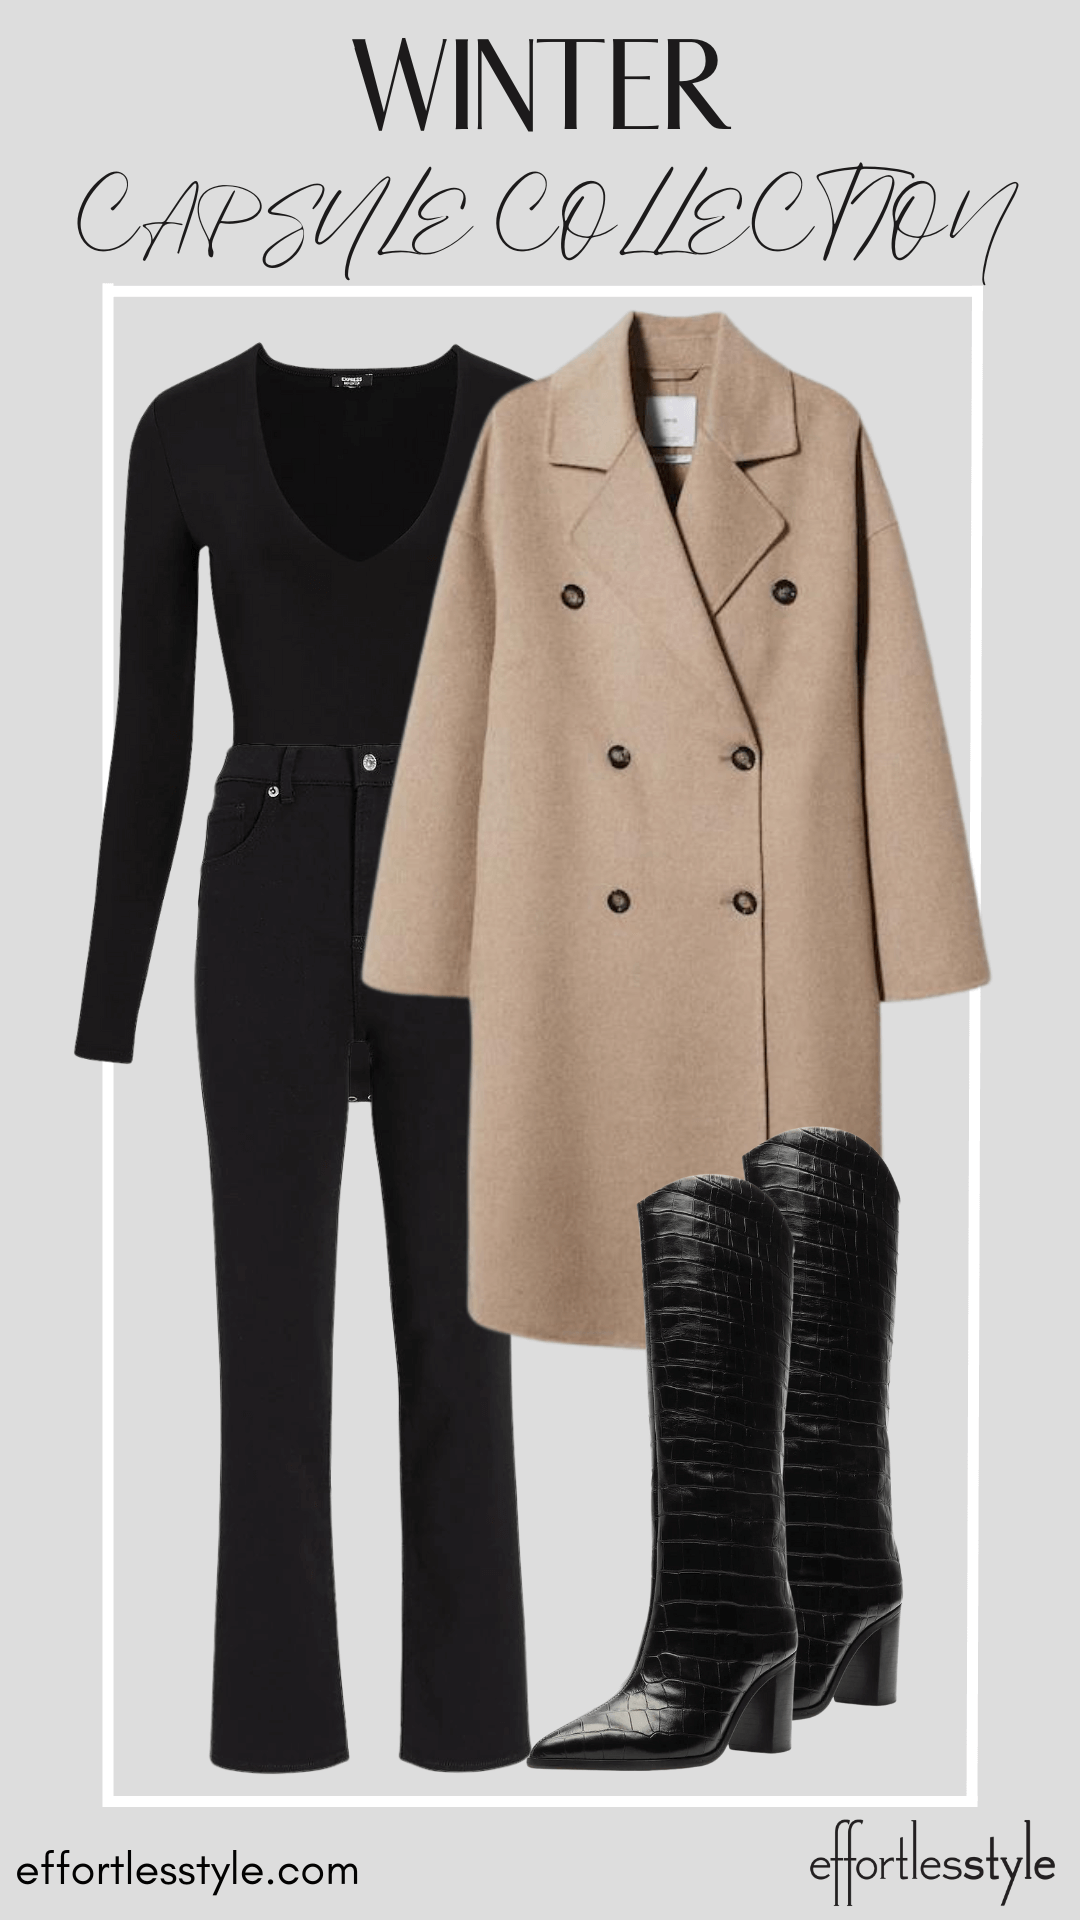 How To Wear Our Winter Capsule Wardrobe - Part 1 Wool Coat & Black Bodysuit & Black Jeans how to wear tall boots with jeans how to wear a brown coat with all black personal stylists share favorite winter jackets how to style a camel wool coat